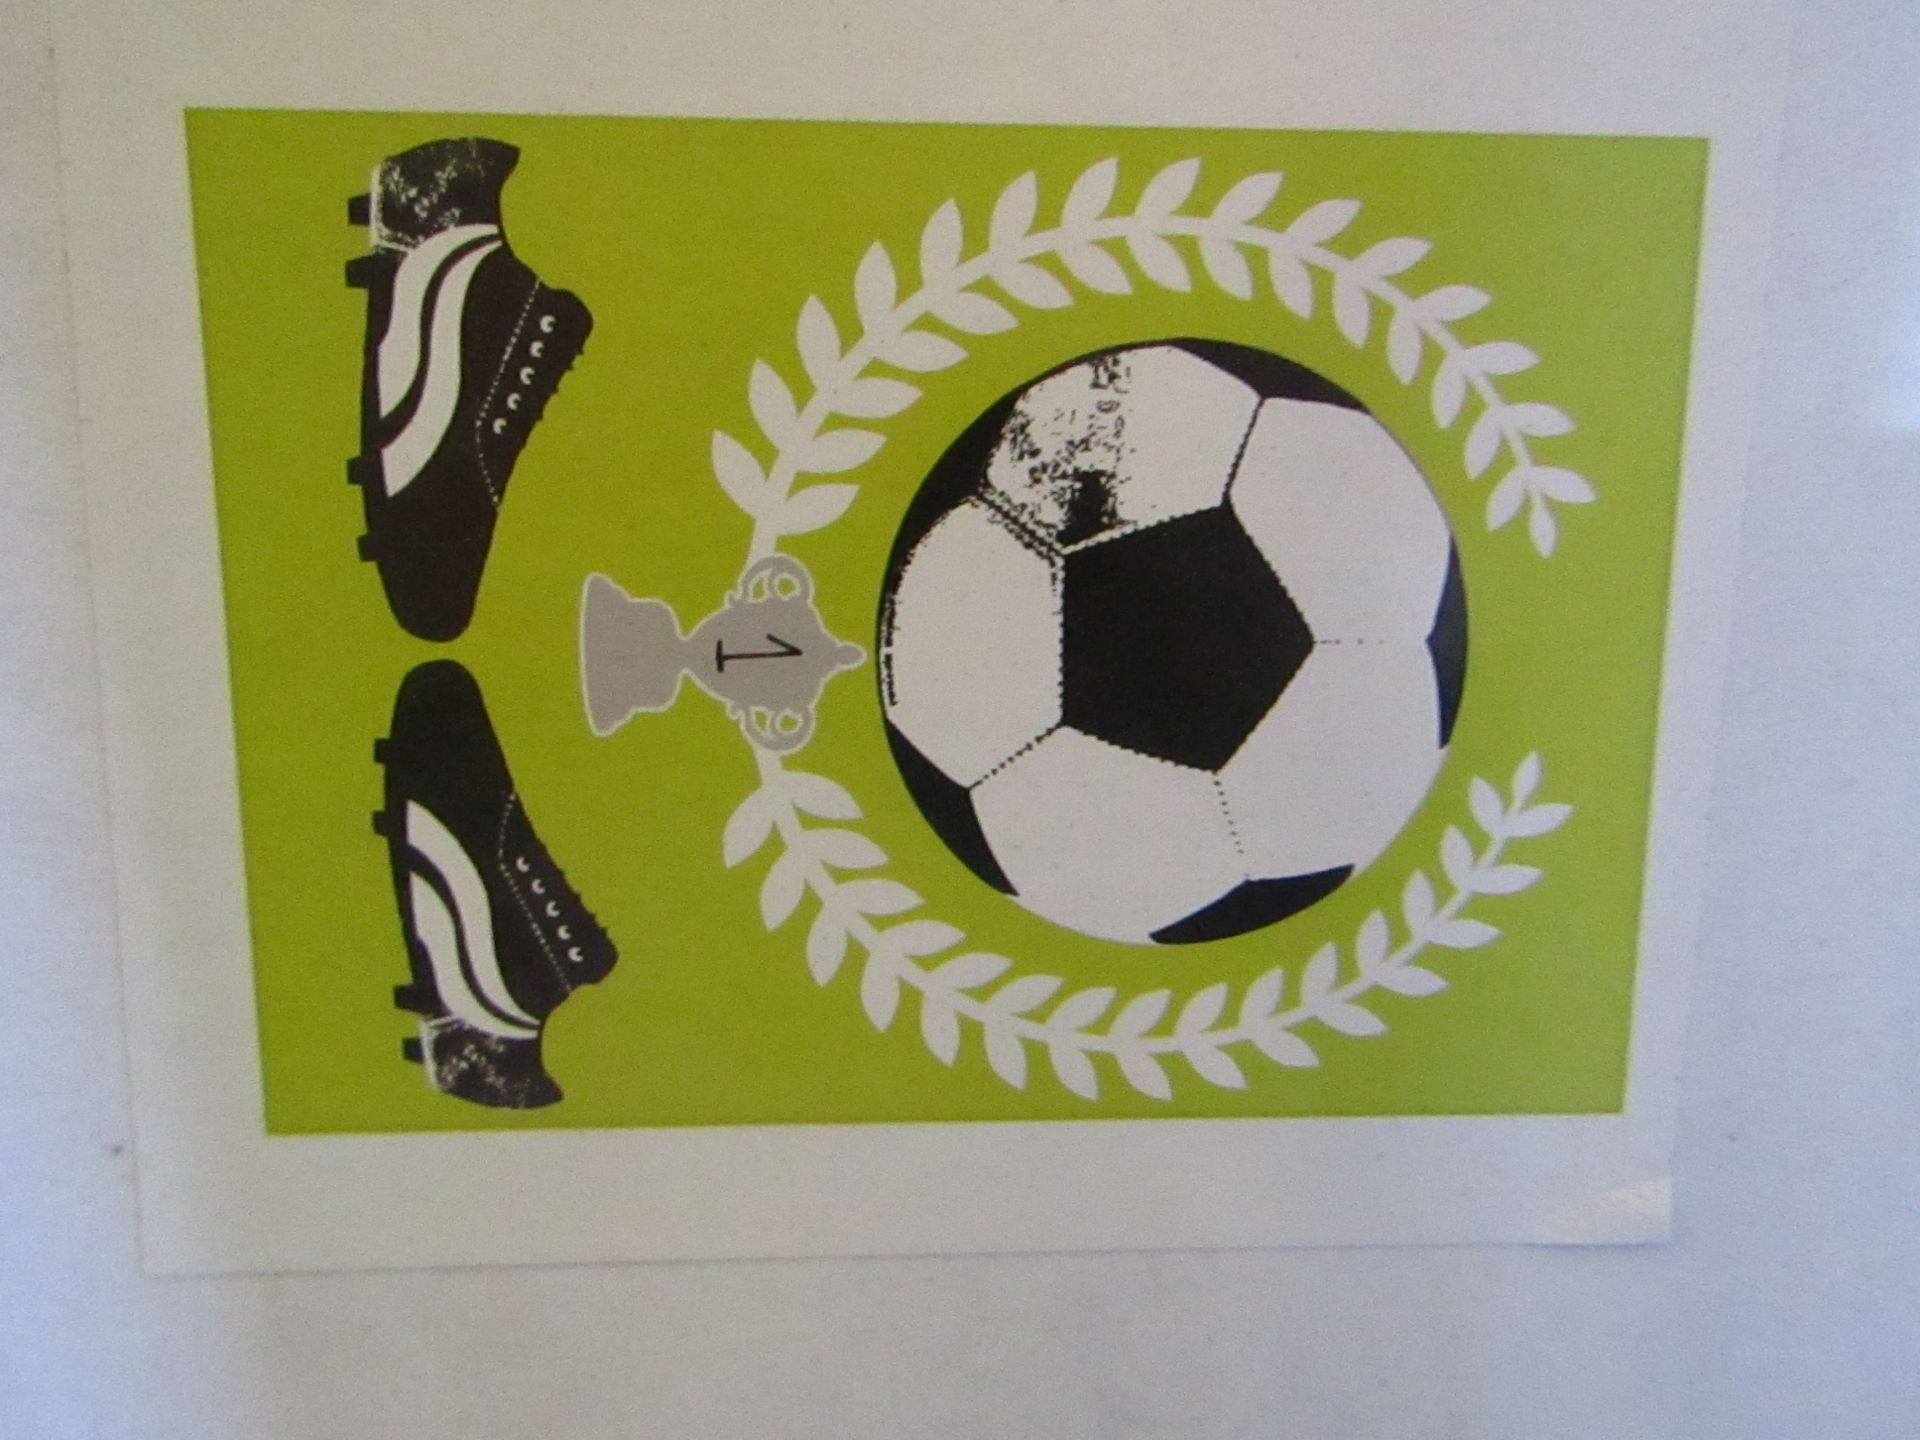 10 x "Football" Framed Print by Arthouse size 40cm x 30cm new & packaged